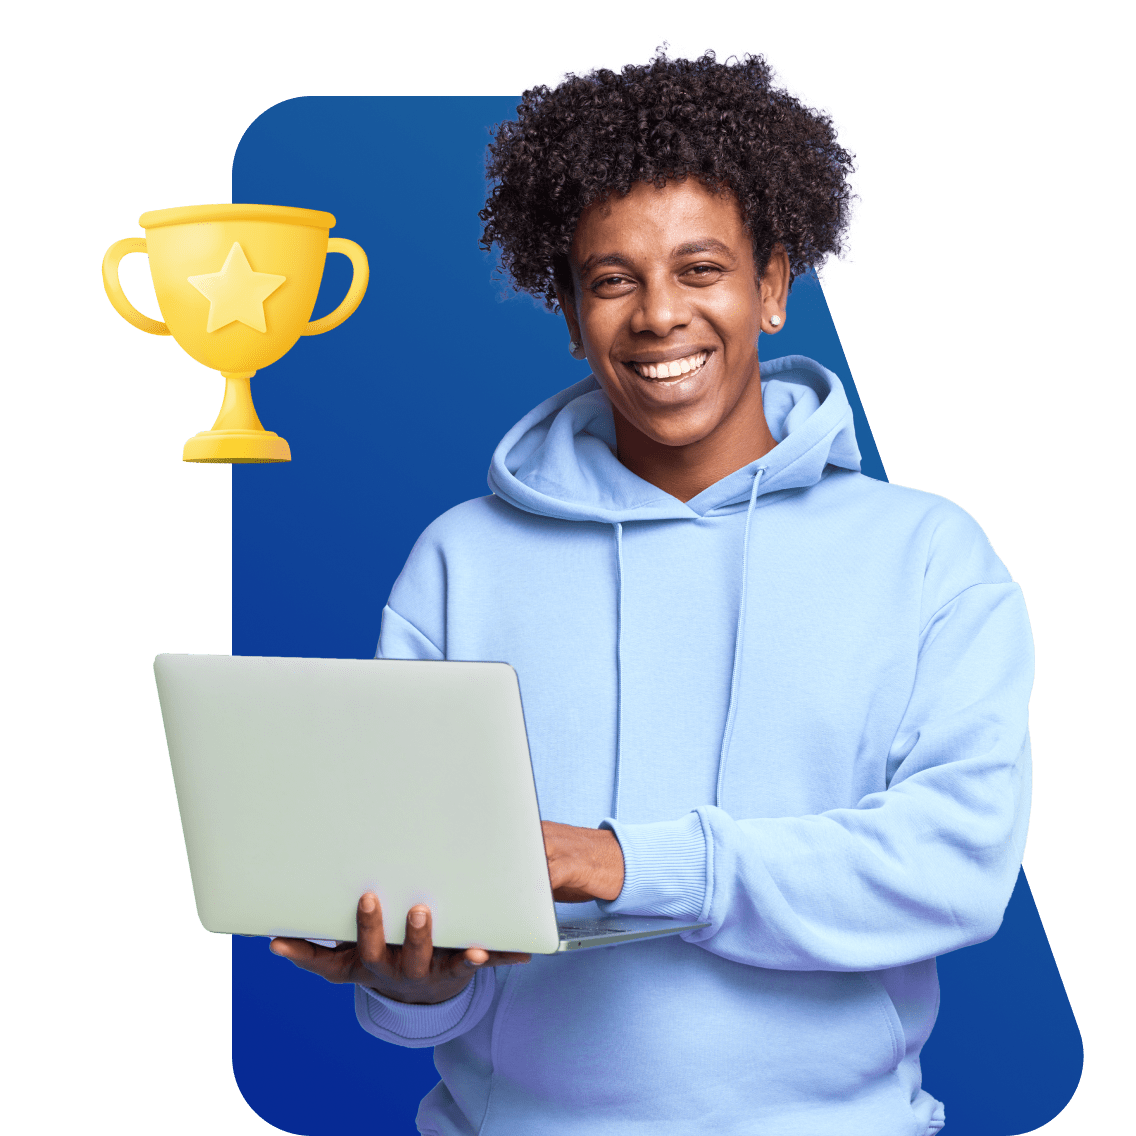 New Mexico Online Schools image 1 (name 1 Young Man Laptop Blue Hoodie Award)